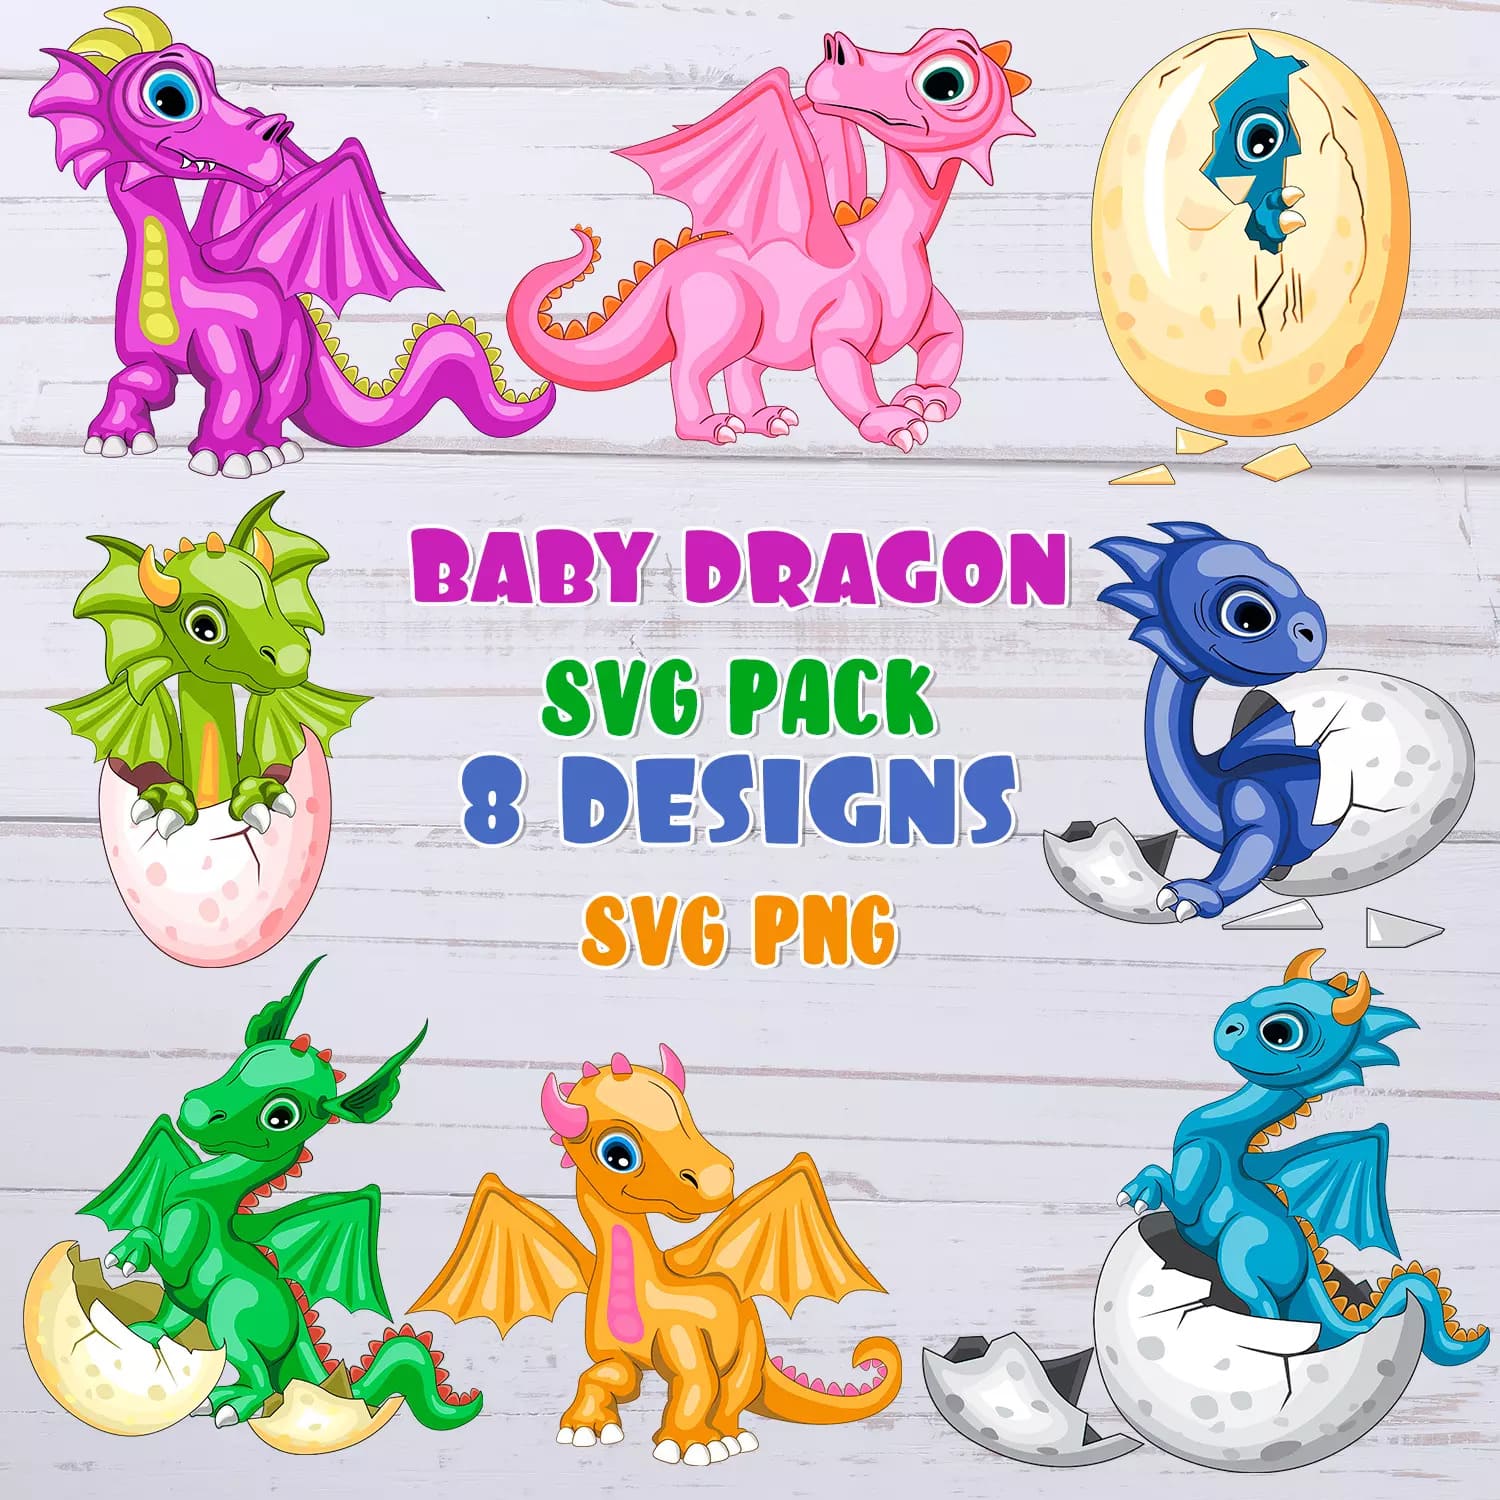 Baby Dragon SVG Preview image.